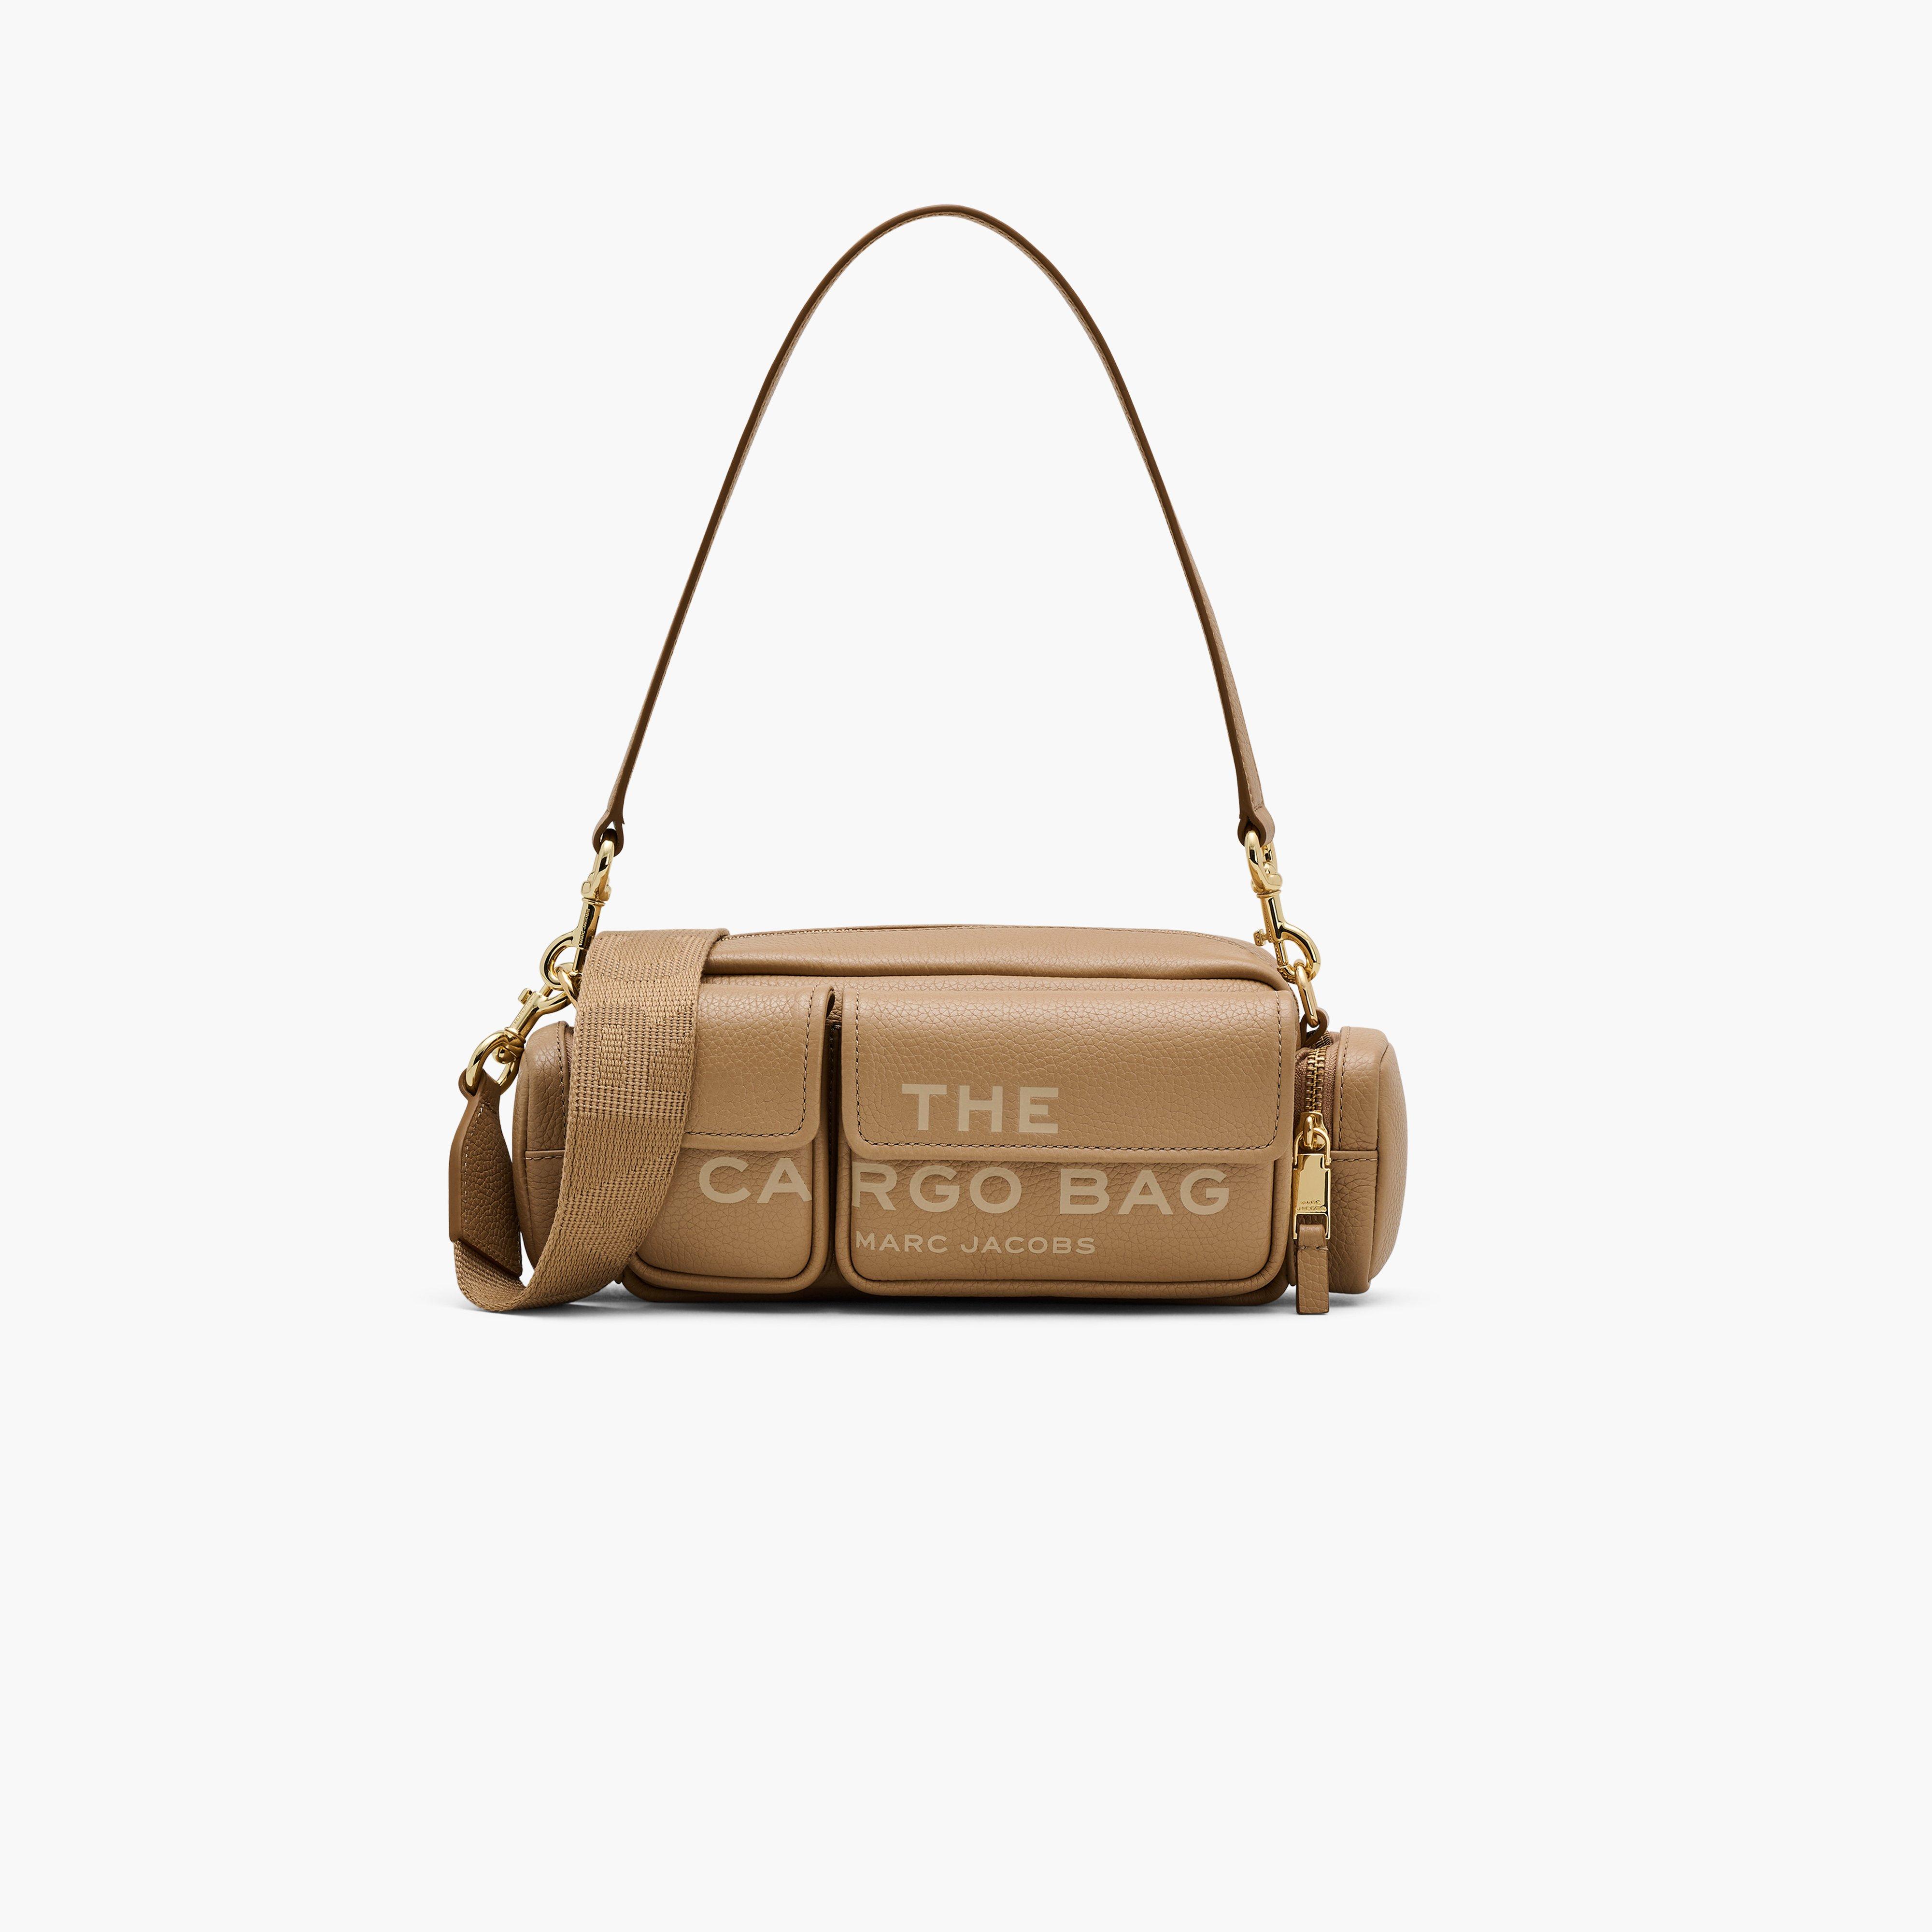 Marc by Marc jacobs The Leather Cargo Bag,CAMEL